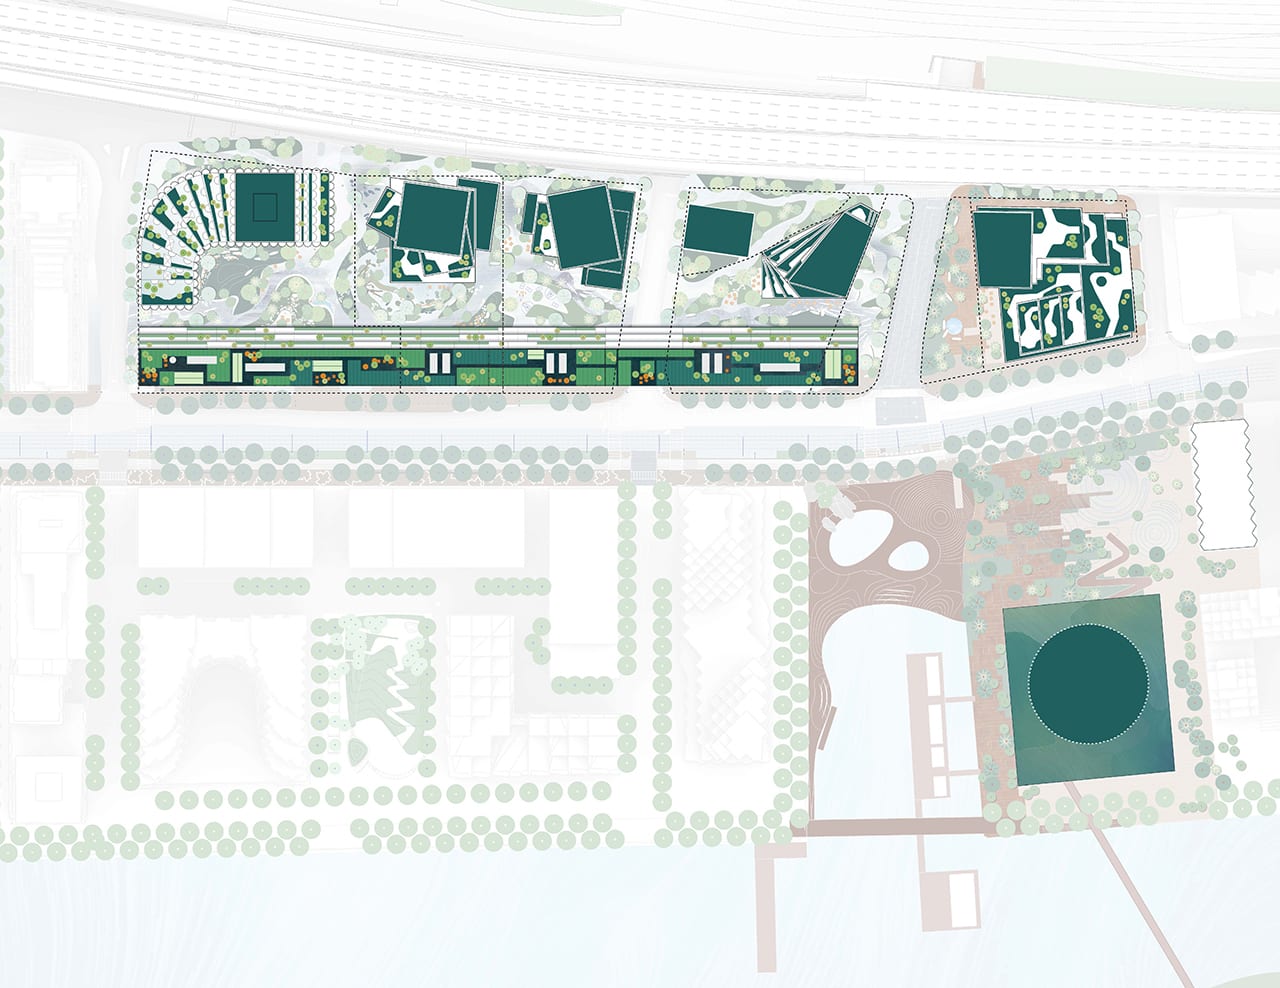 Rendering of Quayside Condos site plan